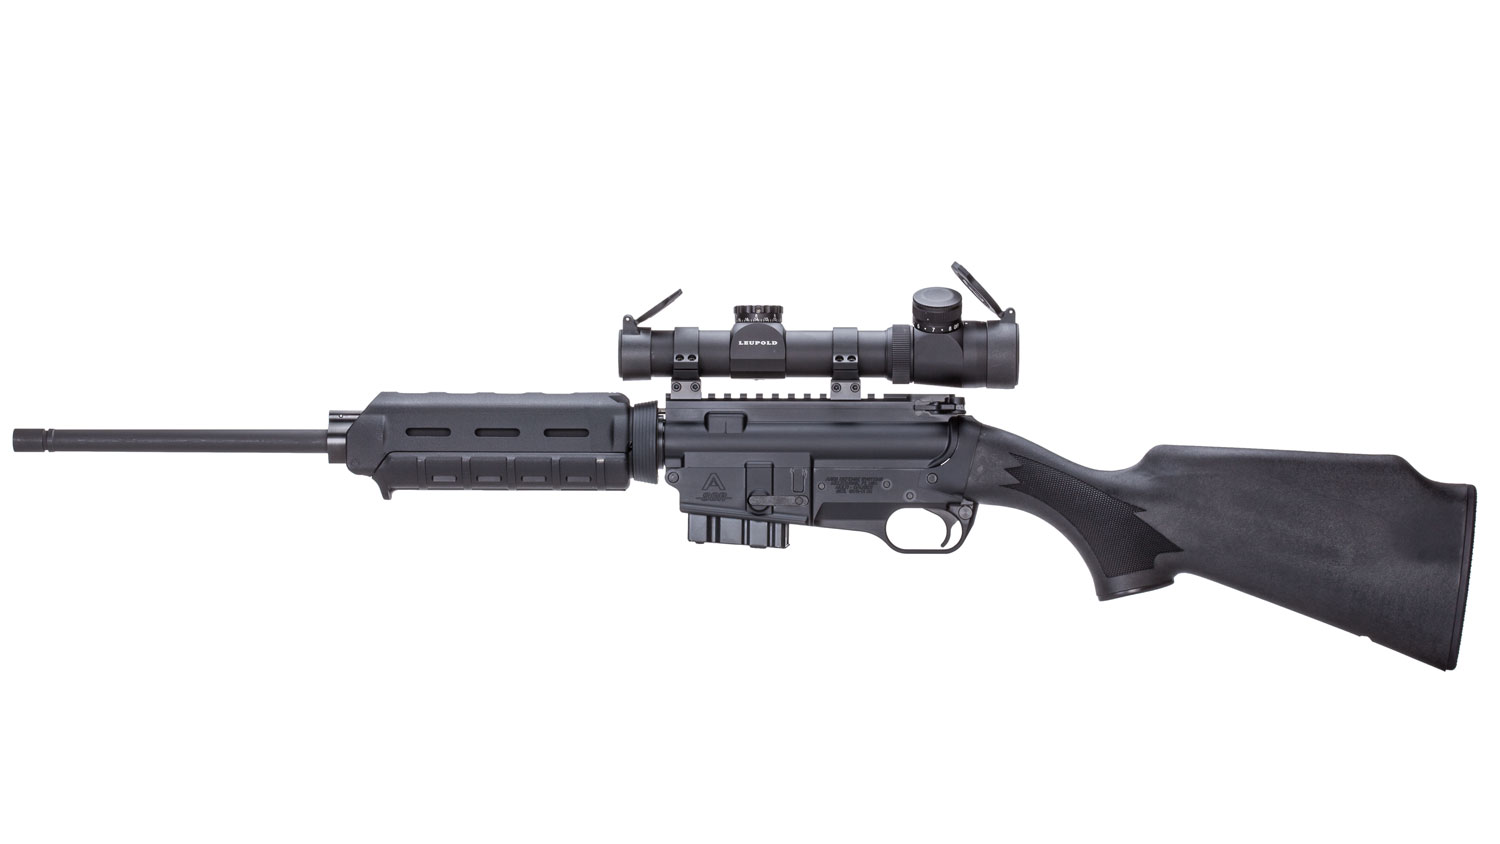 NRA Gun of the Week: ARES Defense SCR Rifle | An Official Journal Of The NRA